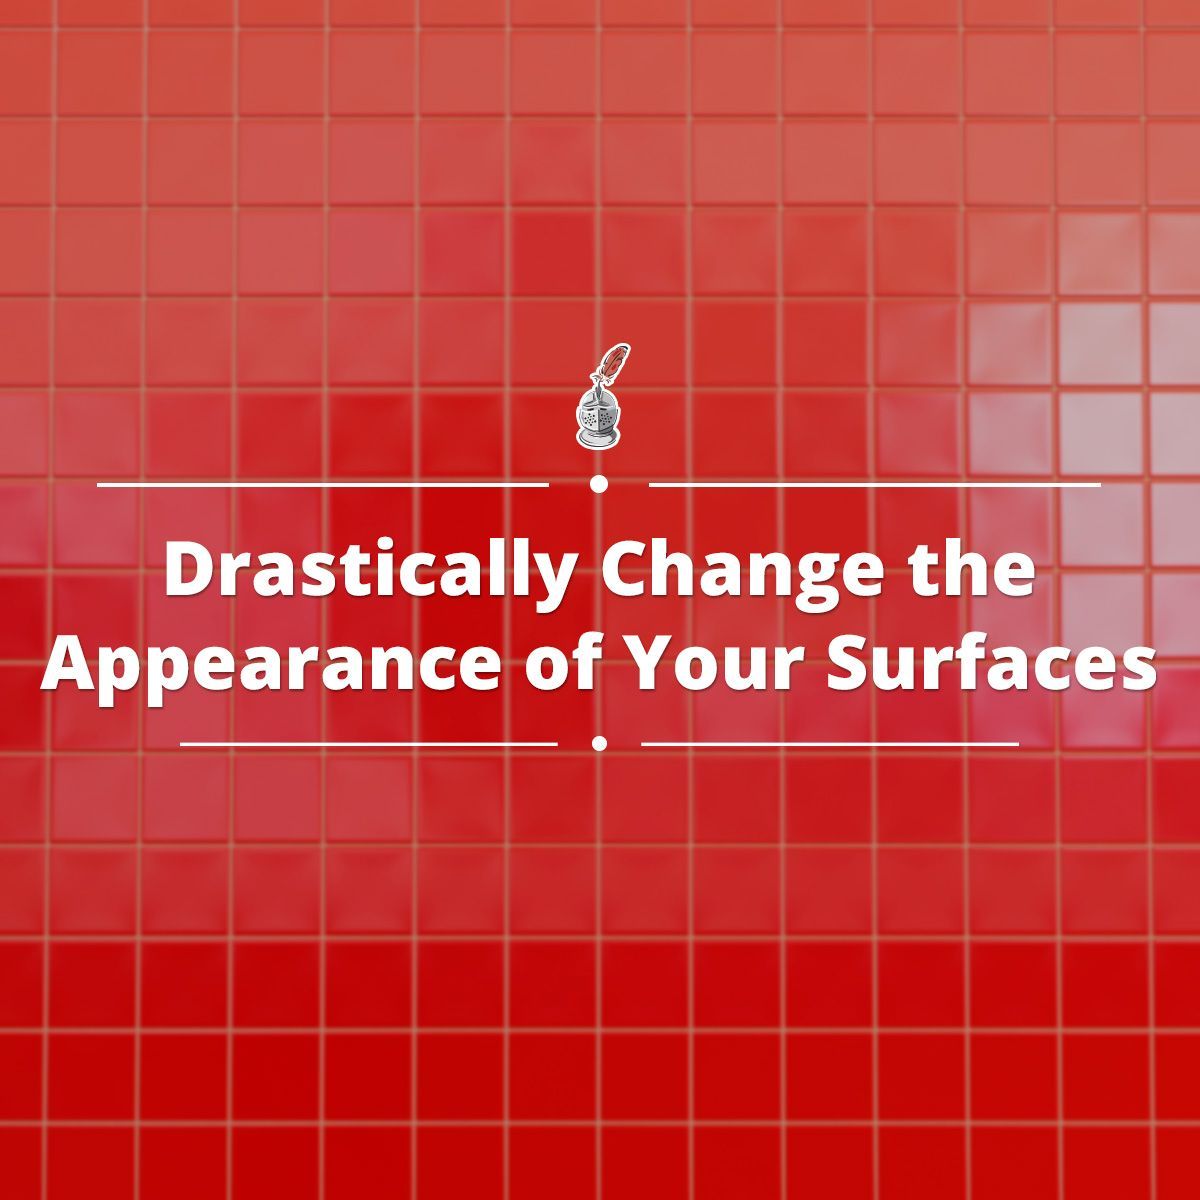 Drastically Change the Appearance of Your Surfaces